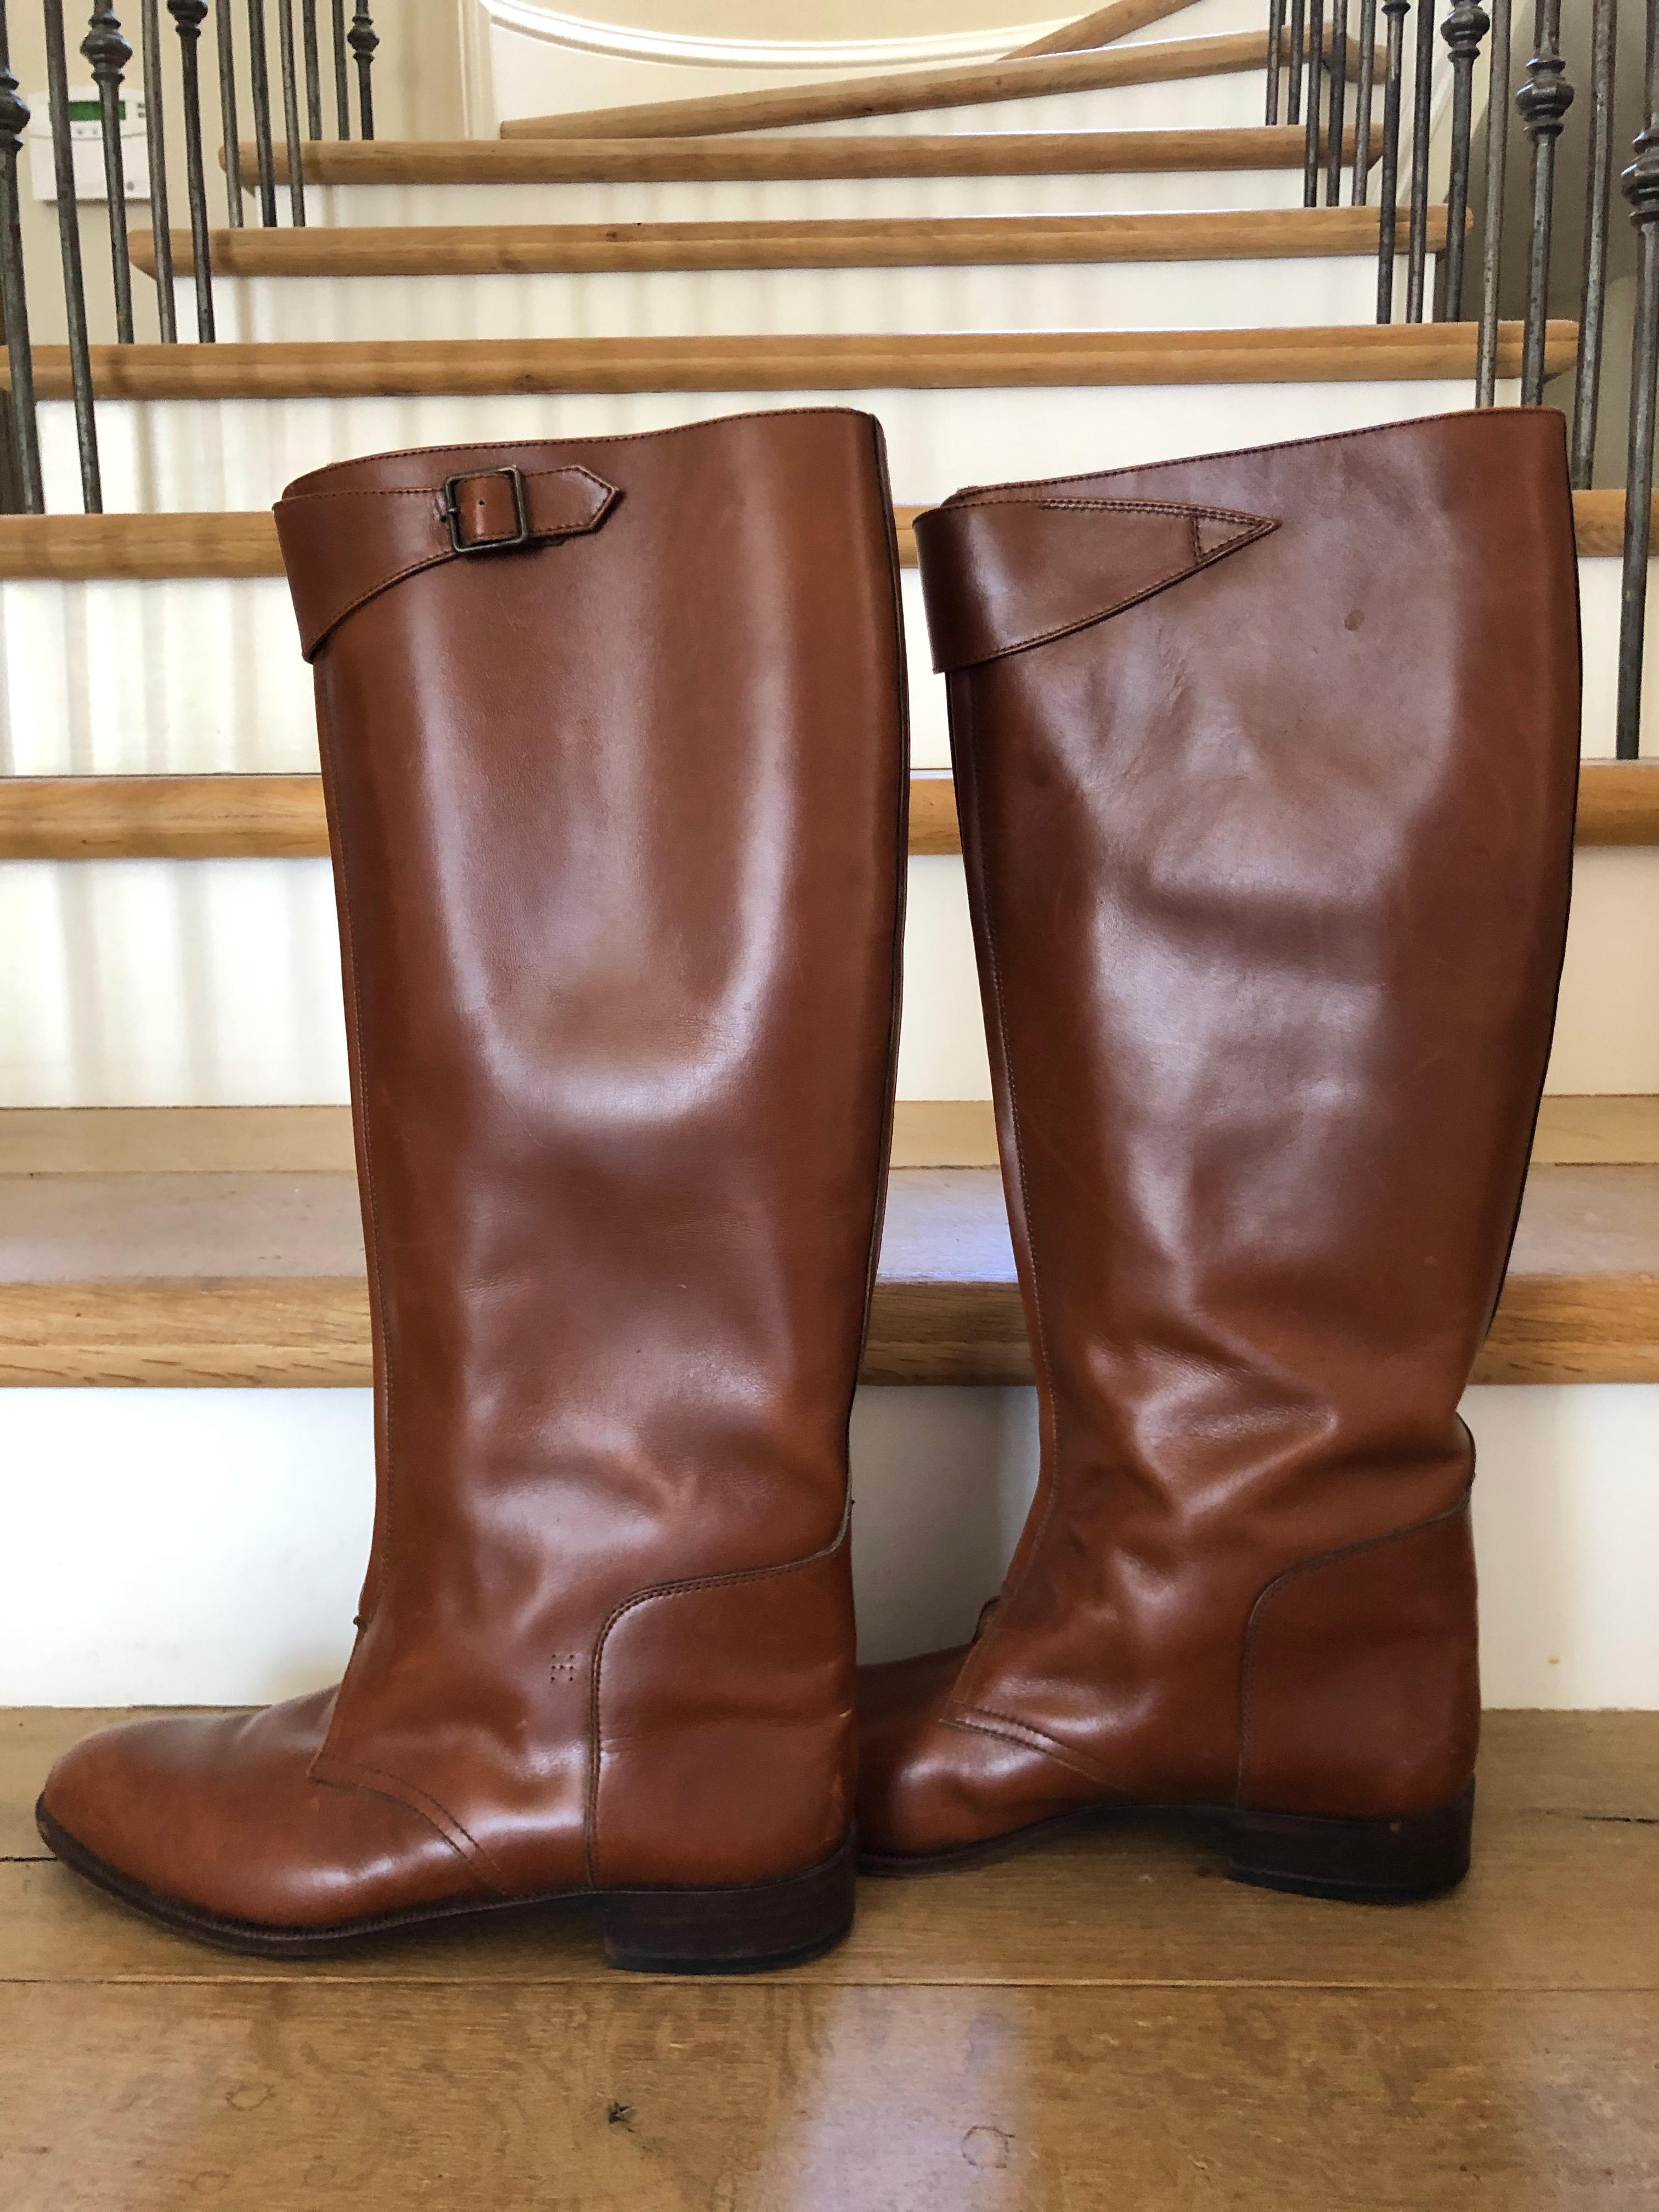 Hermes Vintage Brown Leather Zip Front Riding Boots
Size 39 
Bottom Sole measures 10.5 x 3.25
Boot height is 17